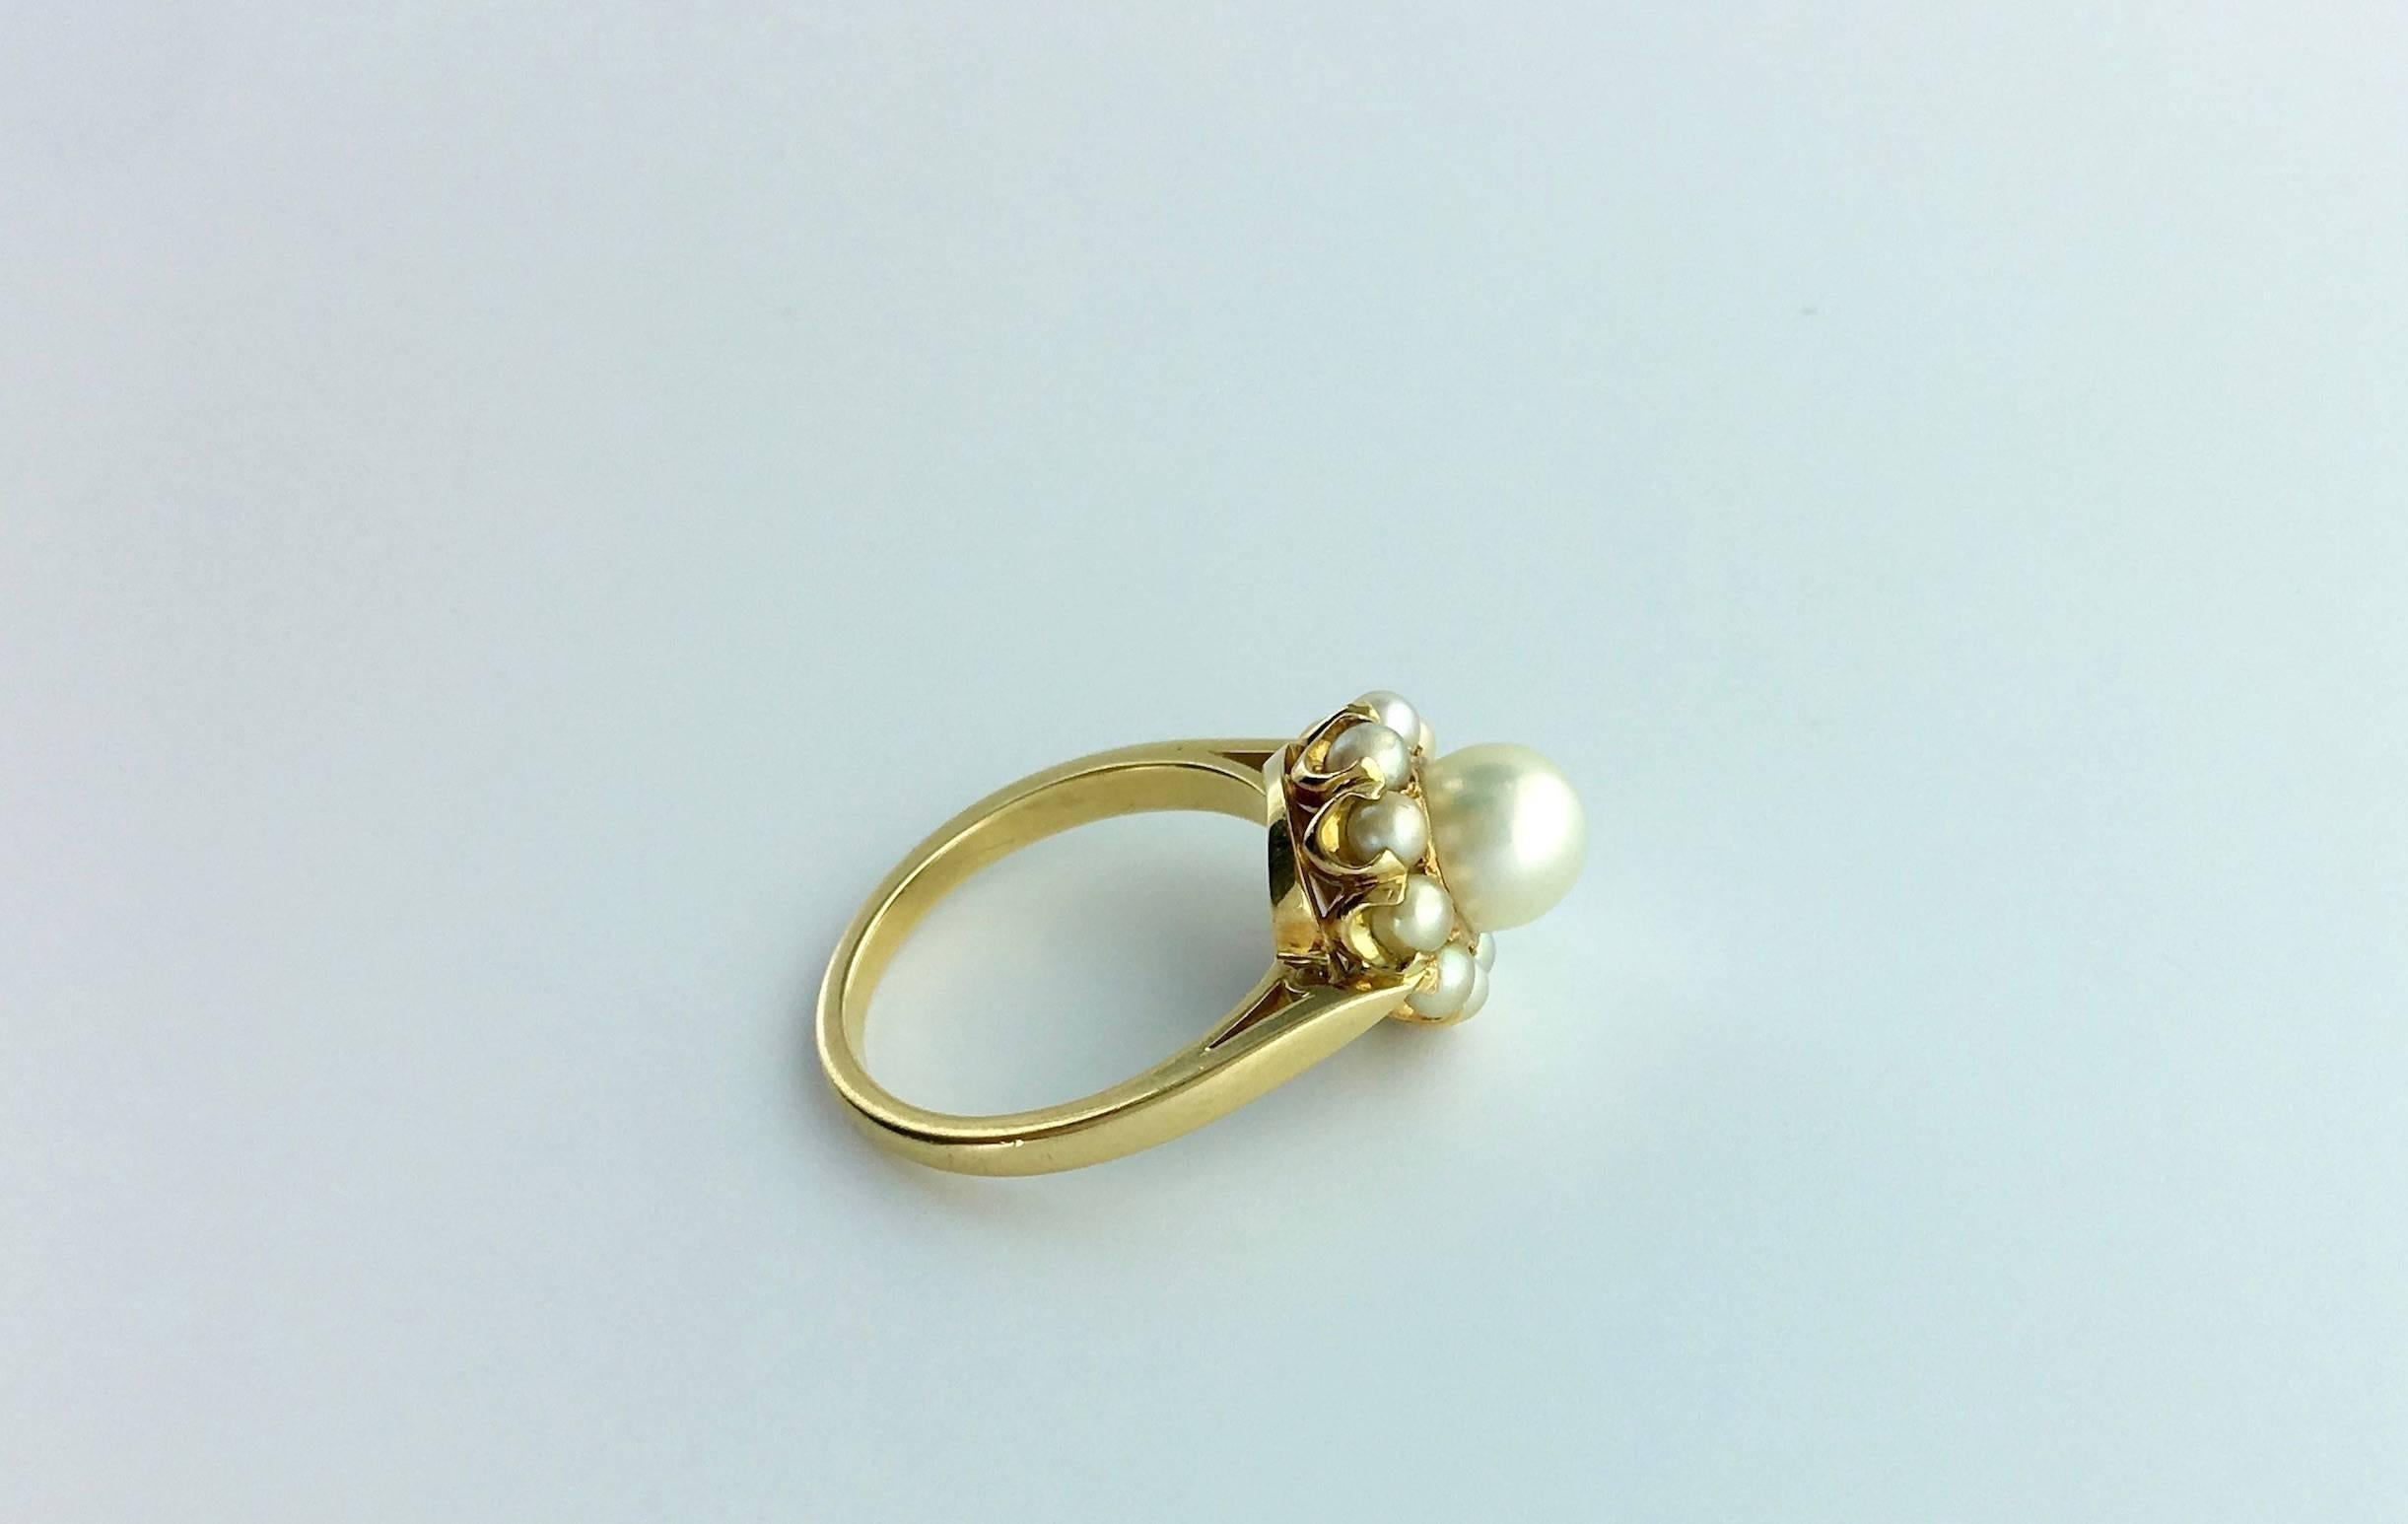 Lovely Ring in yellow gold 18k 750 centered by a Natural Pearl (6.55 millimeters) surrounded by ten smaller Natural Pearls.

Gross weight: 5.34 grams.